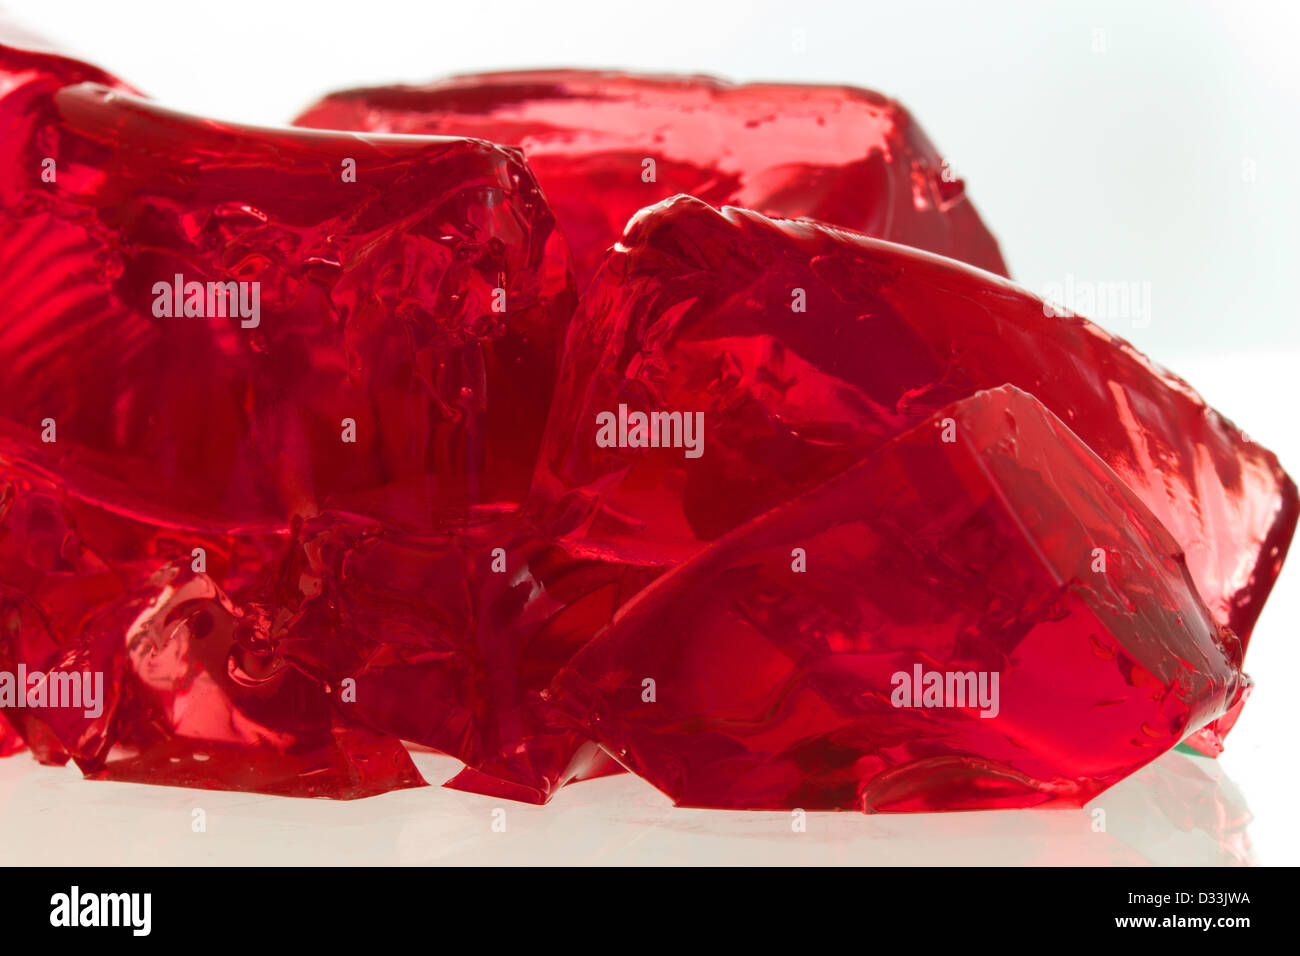 Close-up photo of chunk of red Jelly Stock Photo